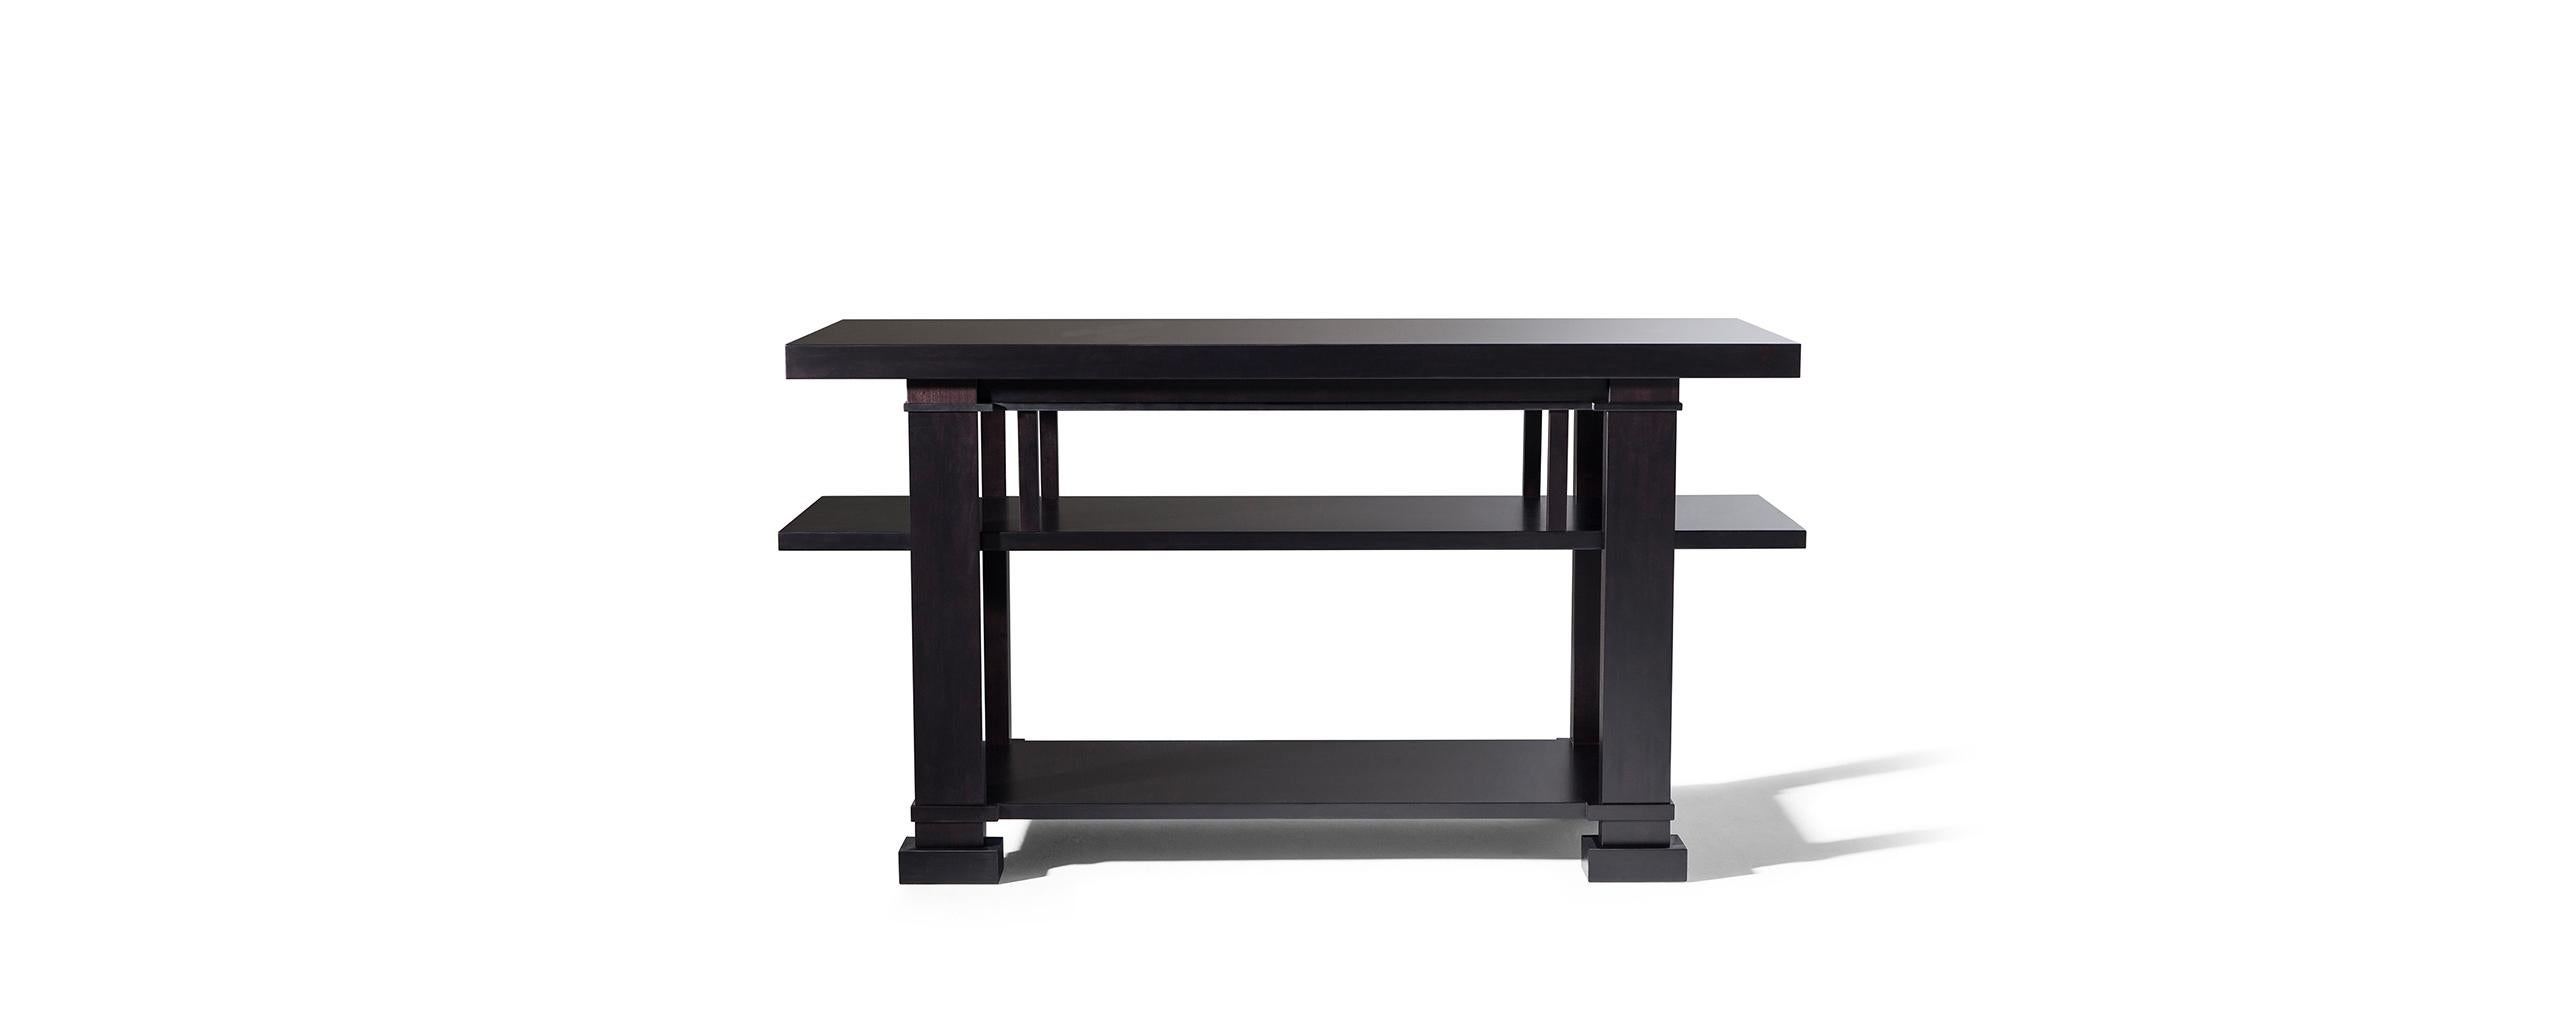 Table designed by Frank Lloyd Wright in 1907, relaunched in 1992.
Manufactured by Cassina in Italy.

This table was originally conceived as a sideboard for the dining room of Boynton Hall in Rochester, New York, which Frank Lloyd Wright designed